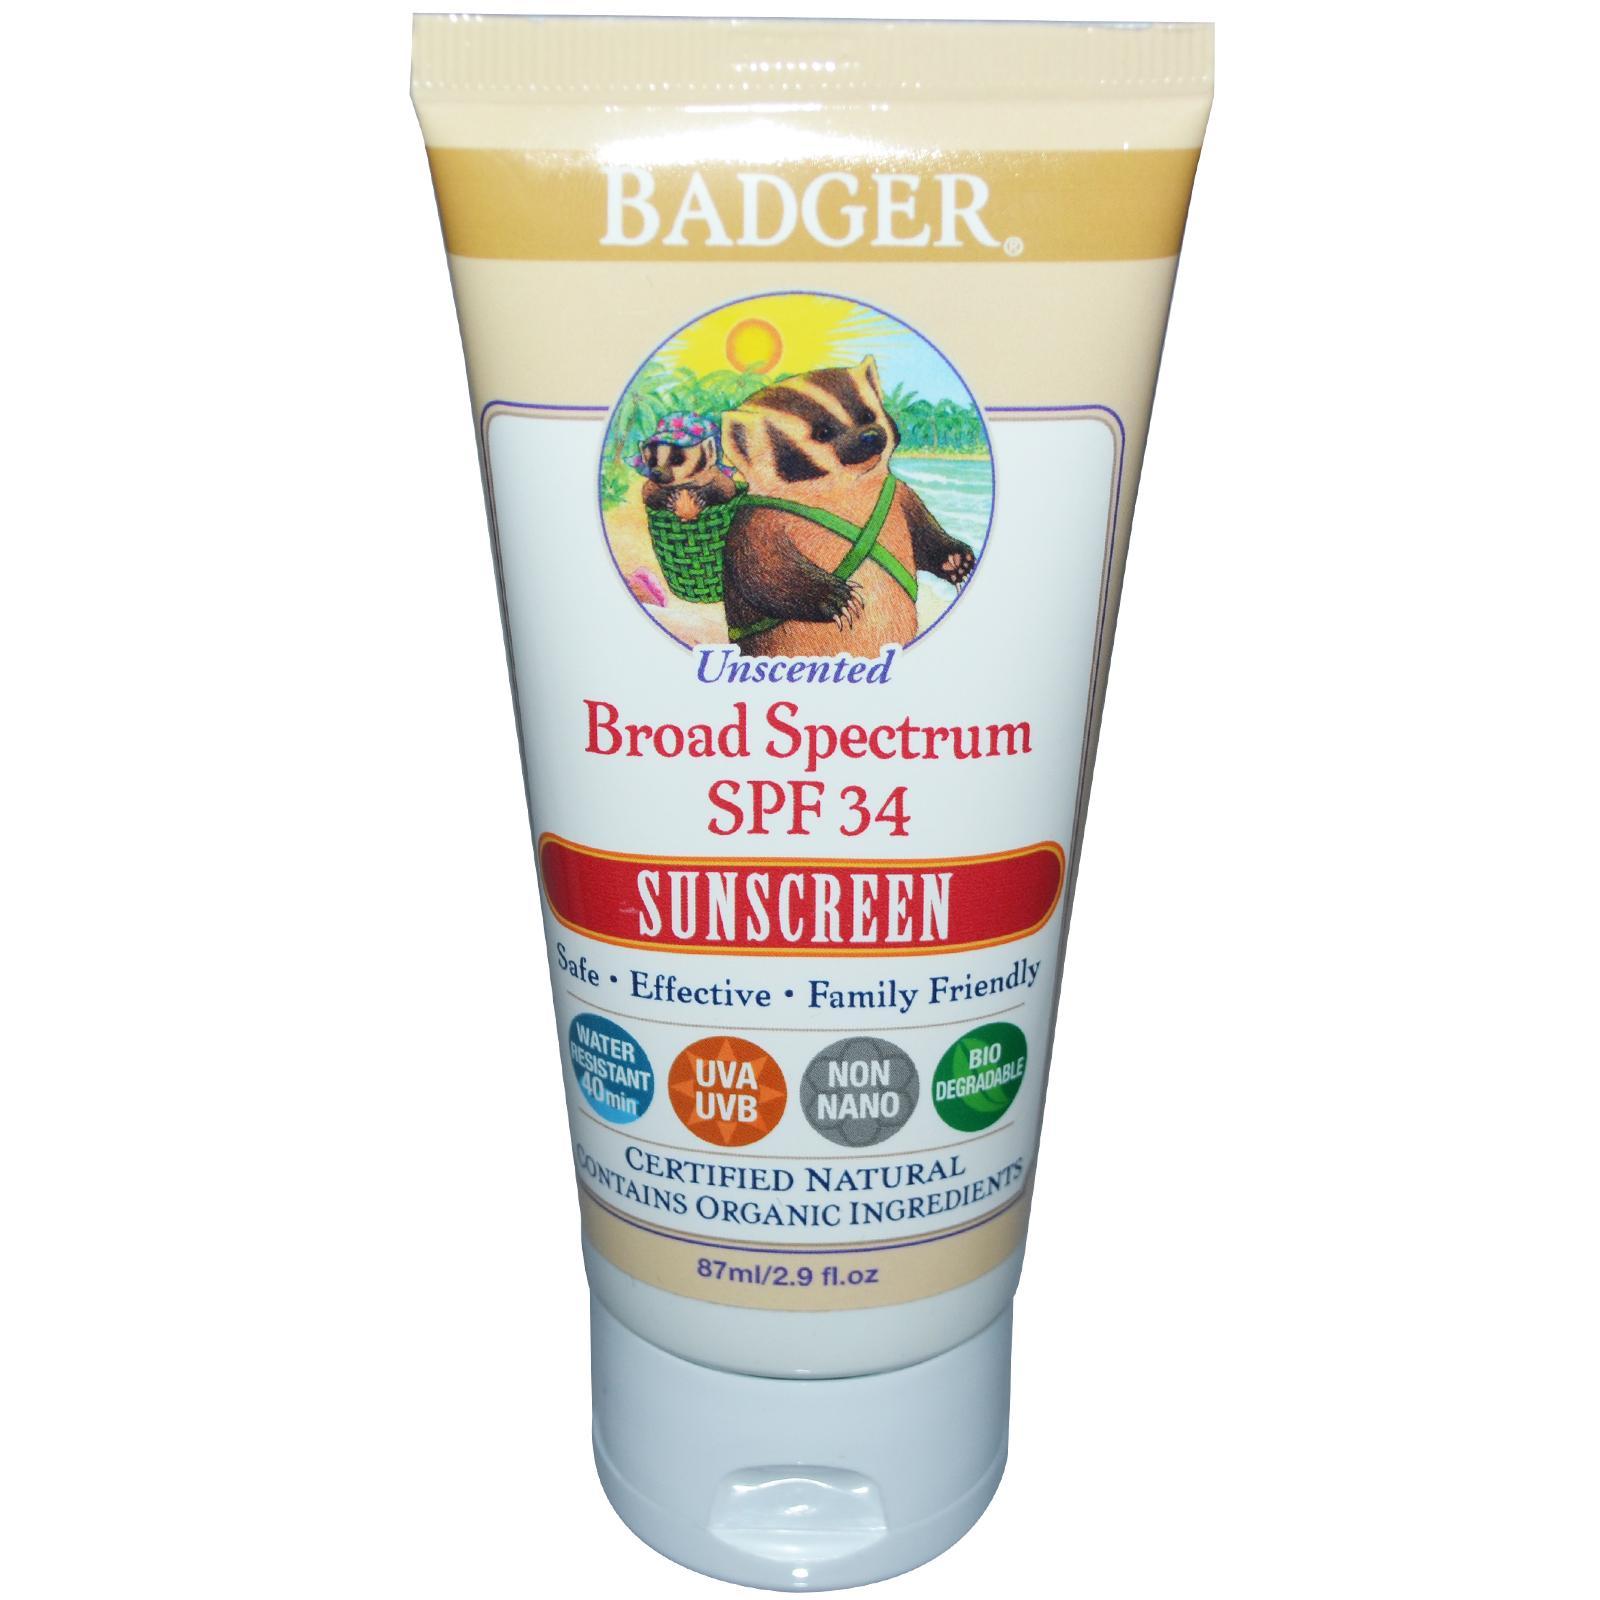 badger Chemical Free Sunscreen: Our Top Picks for Protecting Your Skin